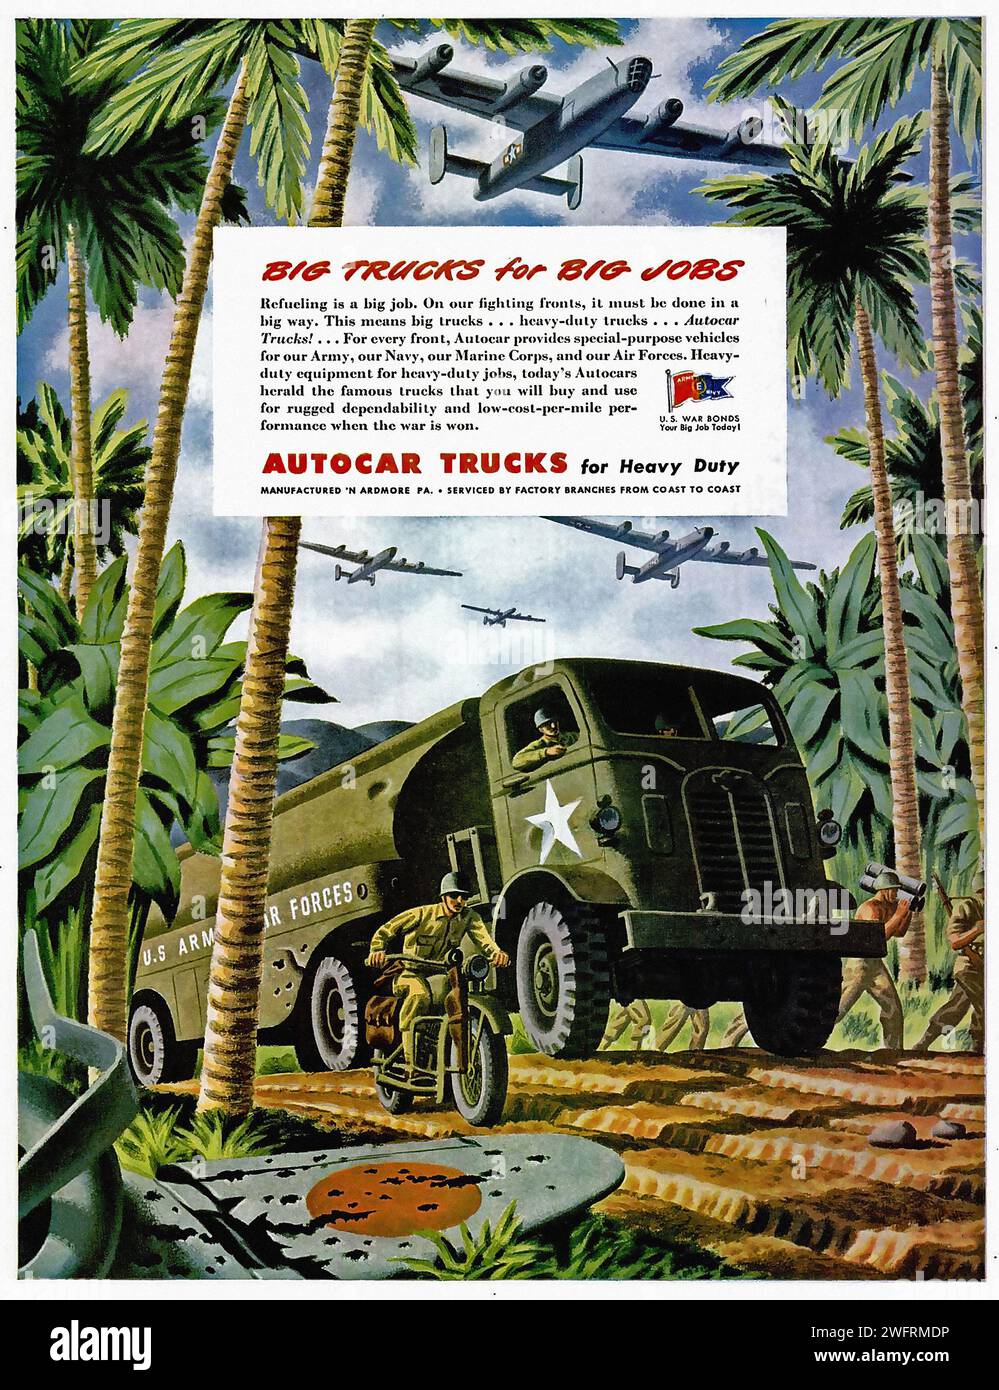 “BIG TRUCKS FOR BIG JOBS”  A U.S. propaganda poster from World War II featuring a large green truck with a white star on the side driving through a jungle. The truck is carrying supplies and has a U.S. Army Air Forces logo on the side. The background is a tropical jungle with palm trees and a blue sky. The poster is designed in a realistic style with bold colors and text. - American (U.S.) advertising, World War II era Stock Photo